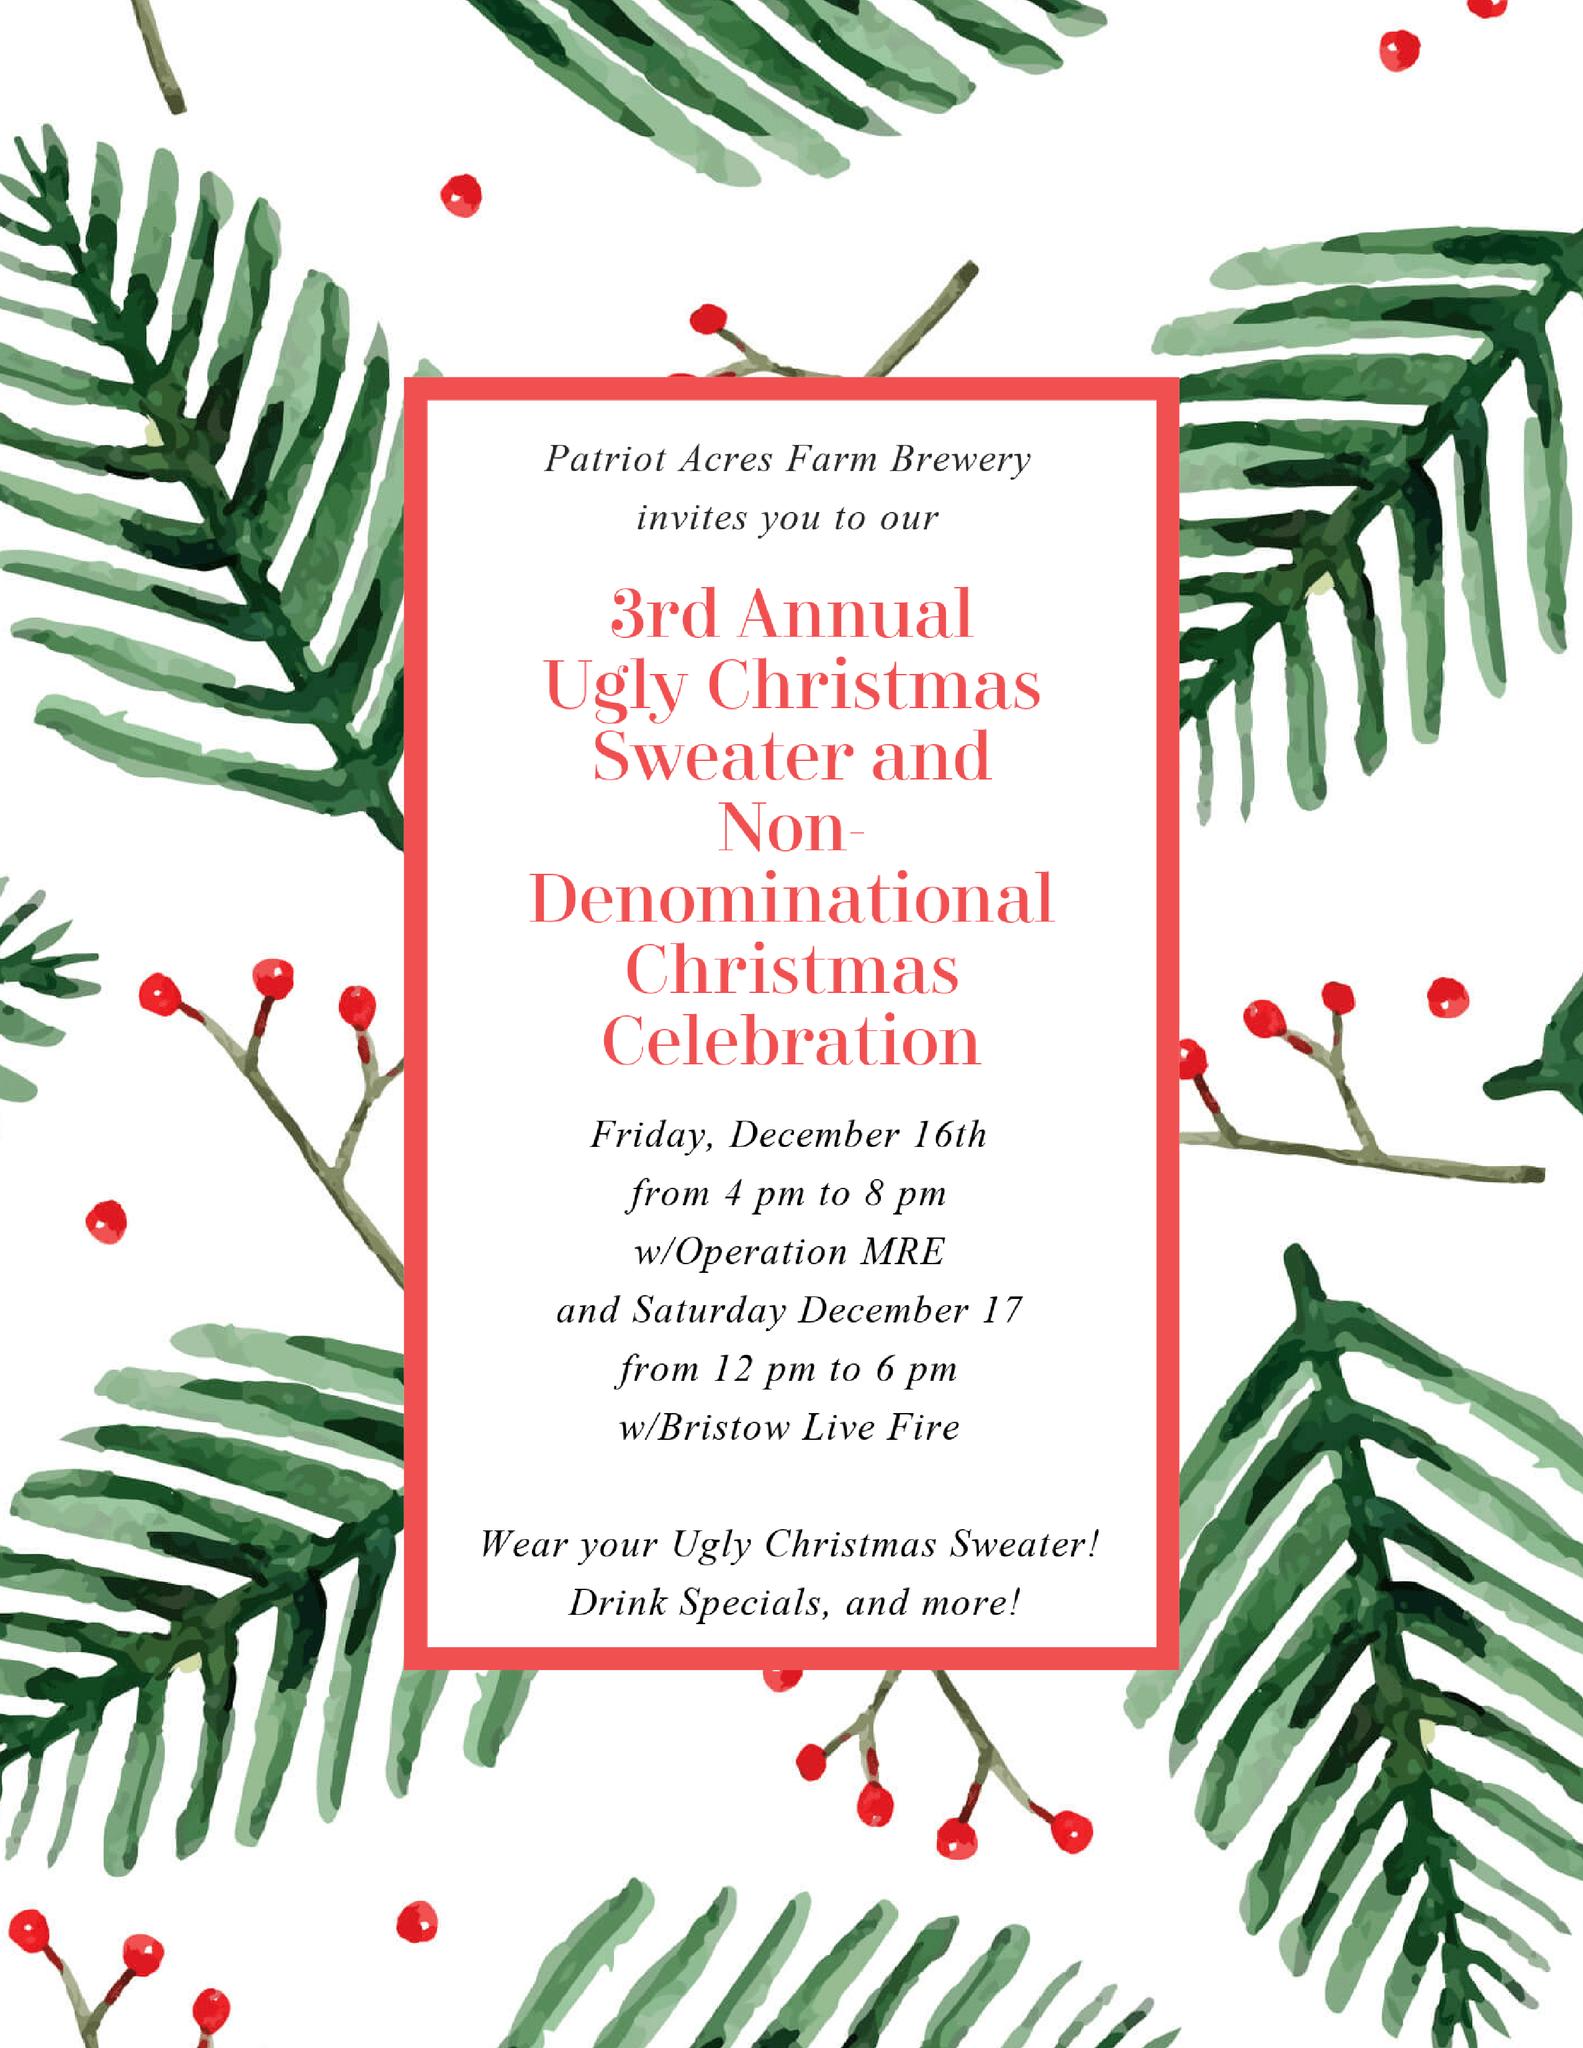 Patriot acres 3rd annual ugly christmas sweater and non denominational Christmas celebration